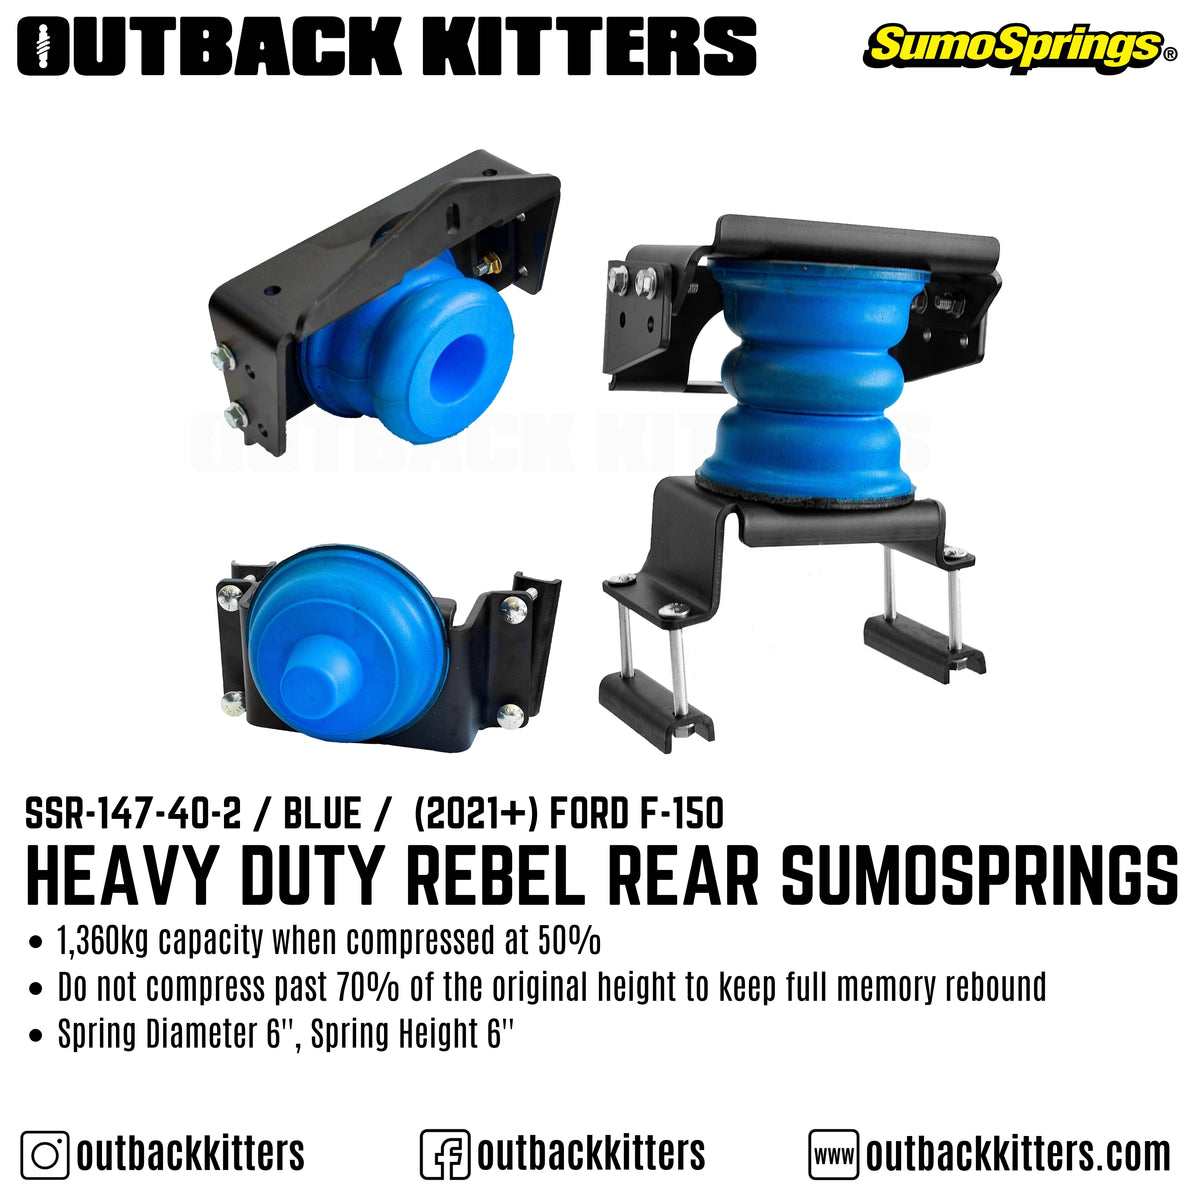 Heavy Duty Rebel Rear SumoSprings to suit 2021+ Ford F150 - Outback Kitters